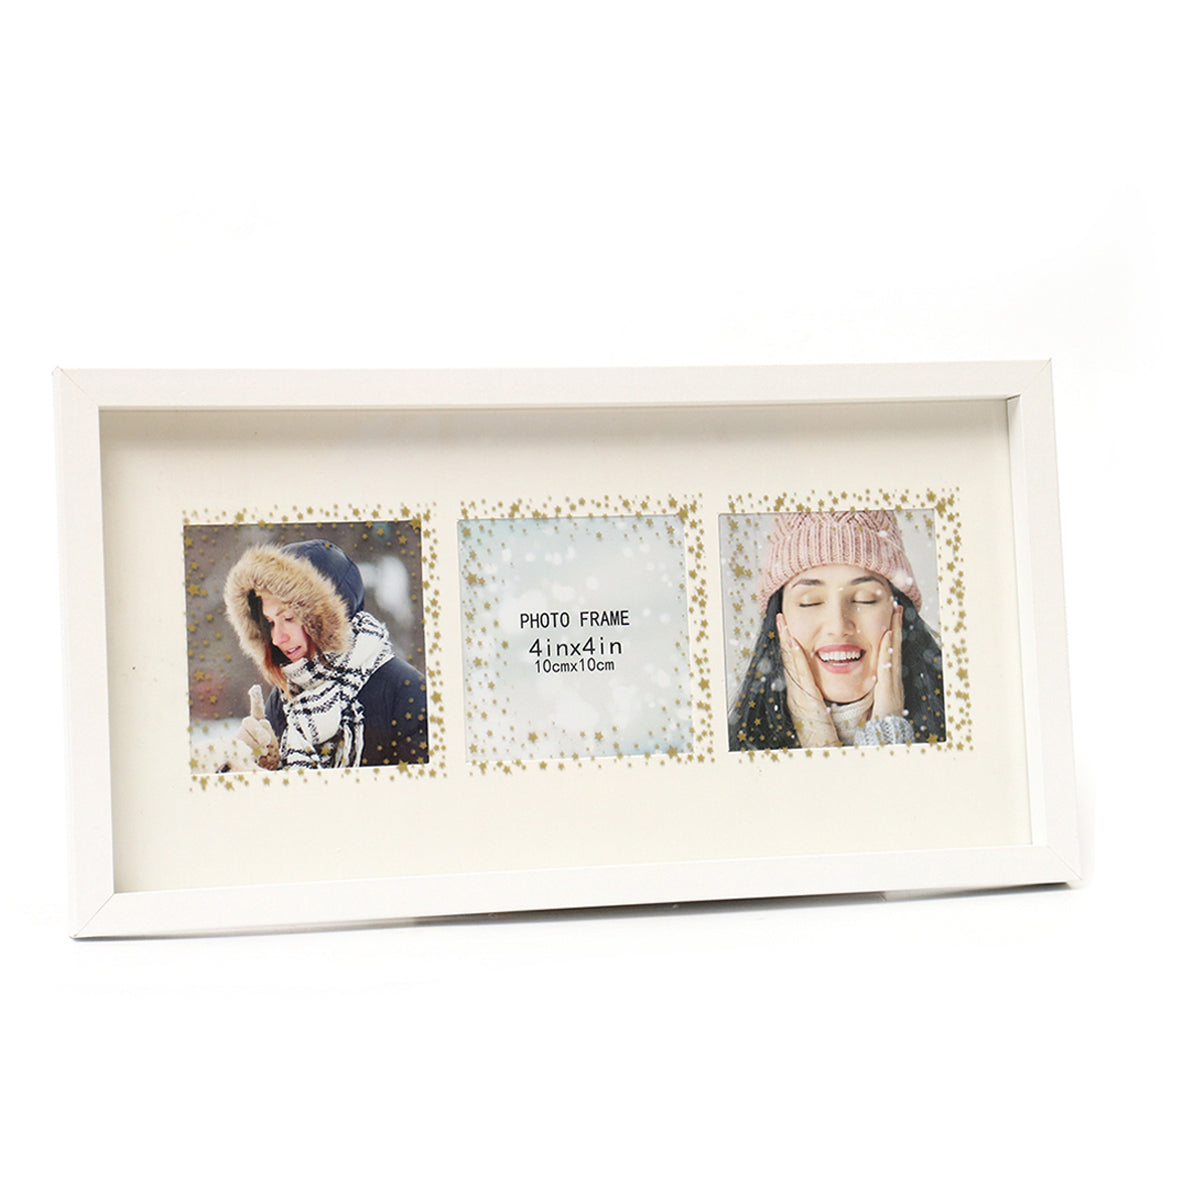 3-Display Collage Wooden Picture Frame (7574625681632)